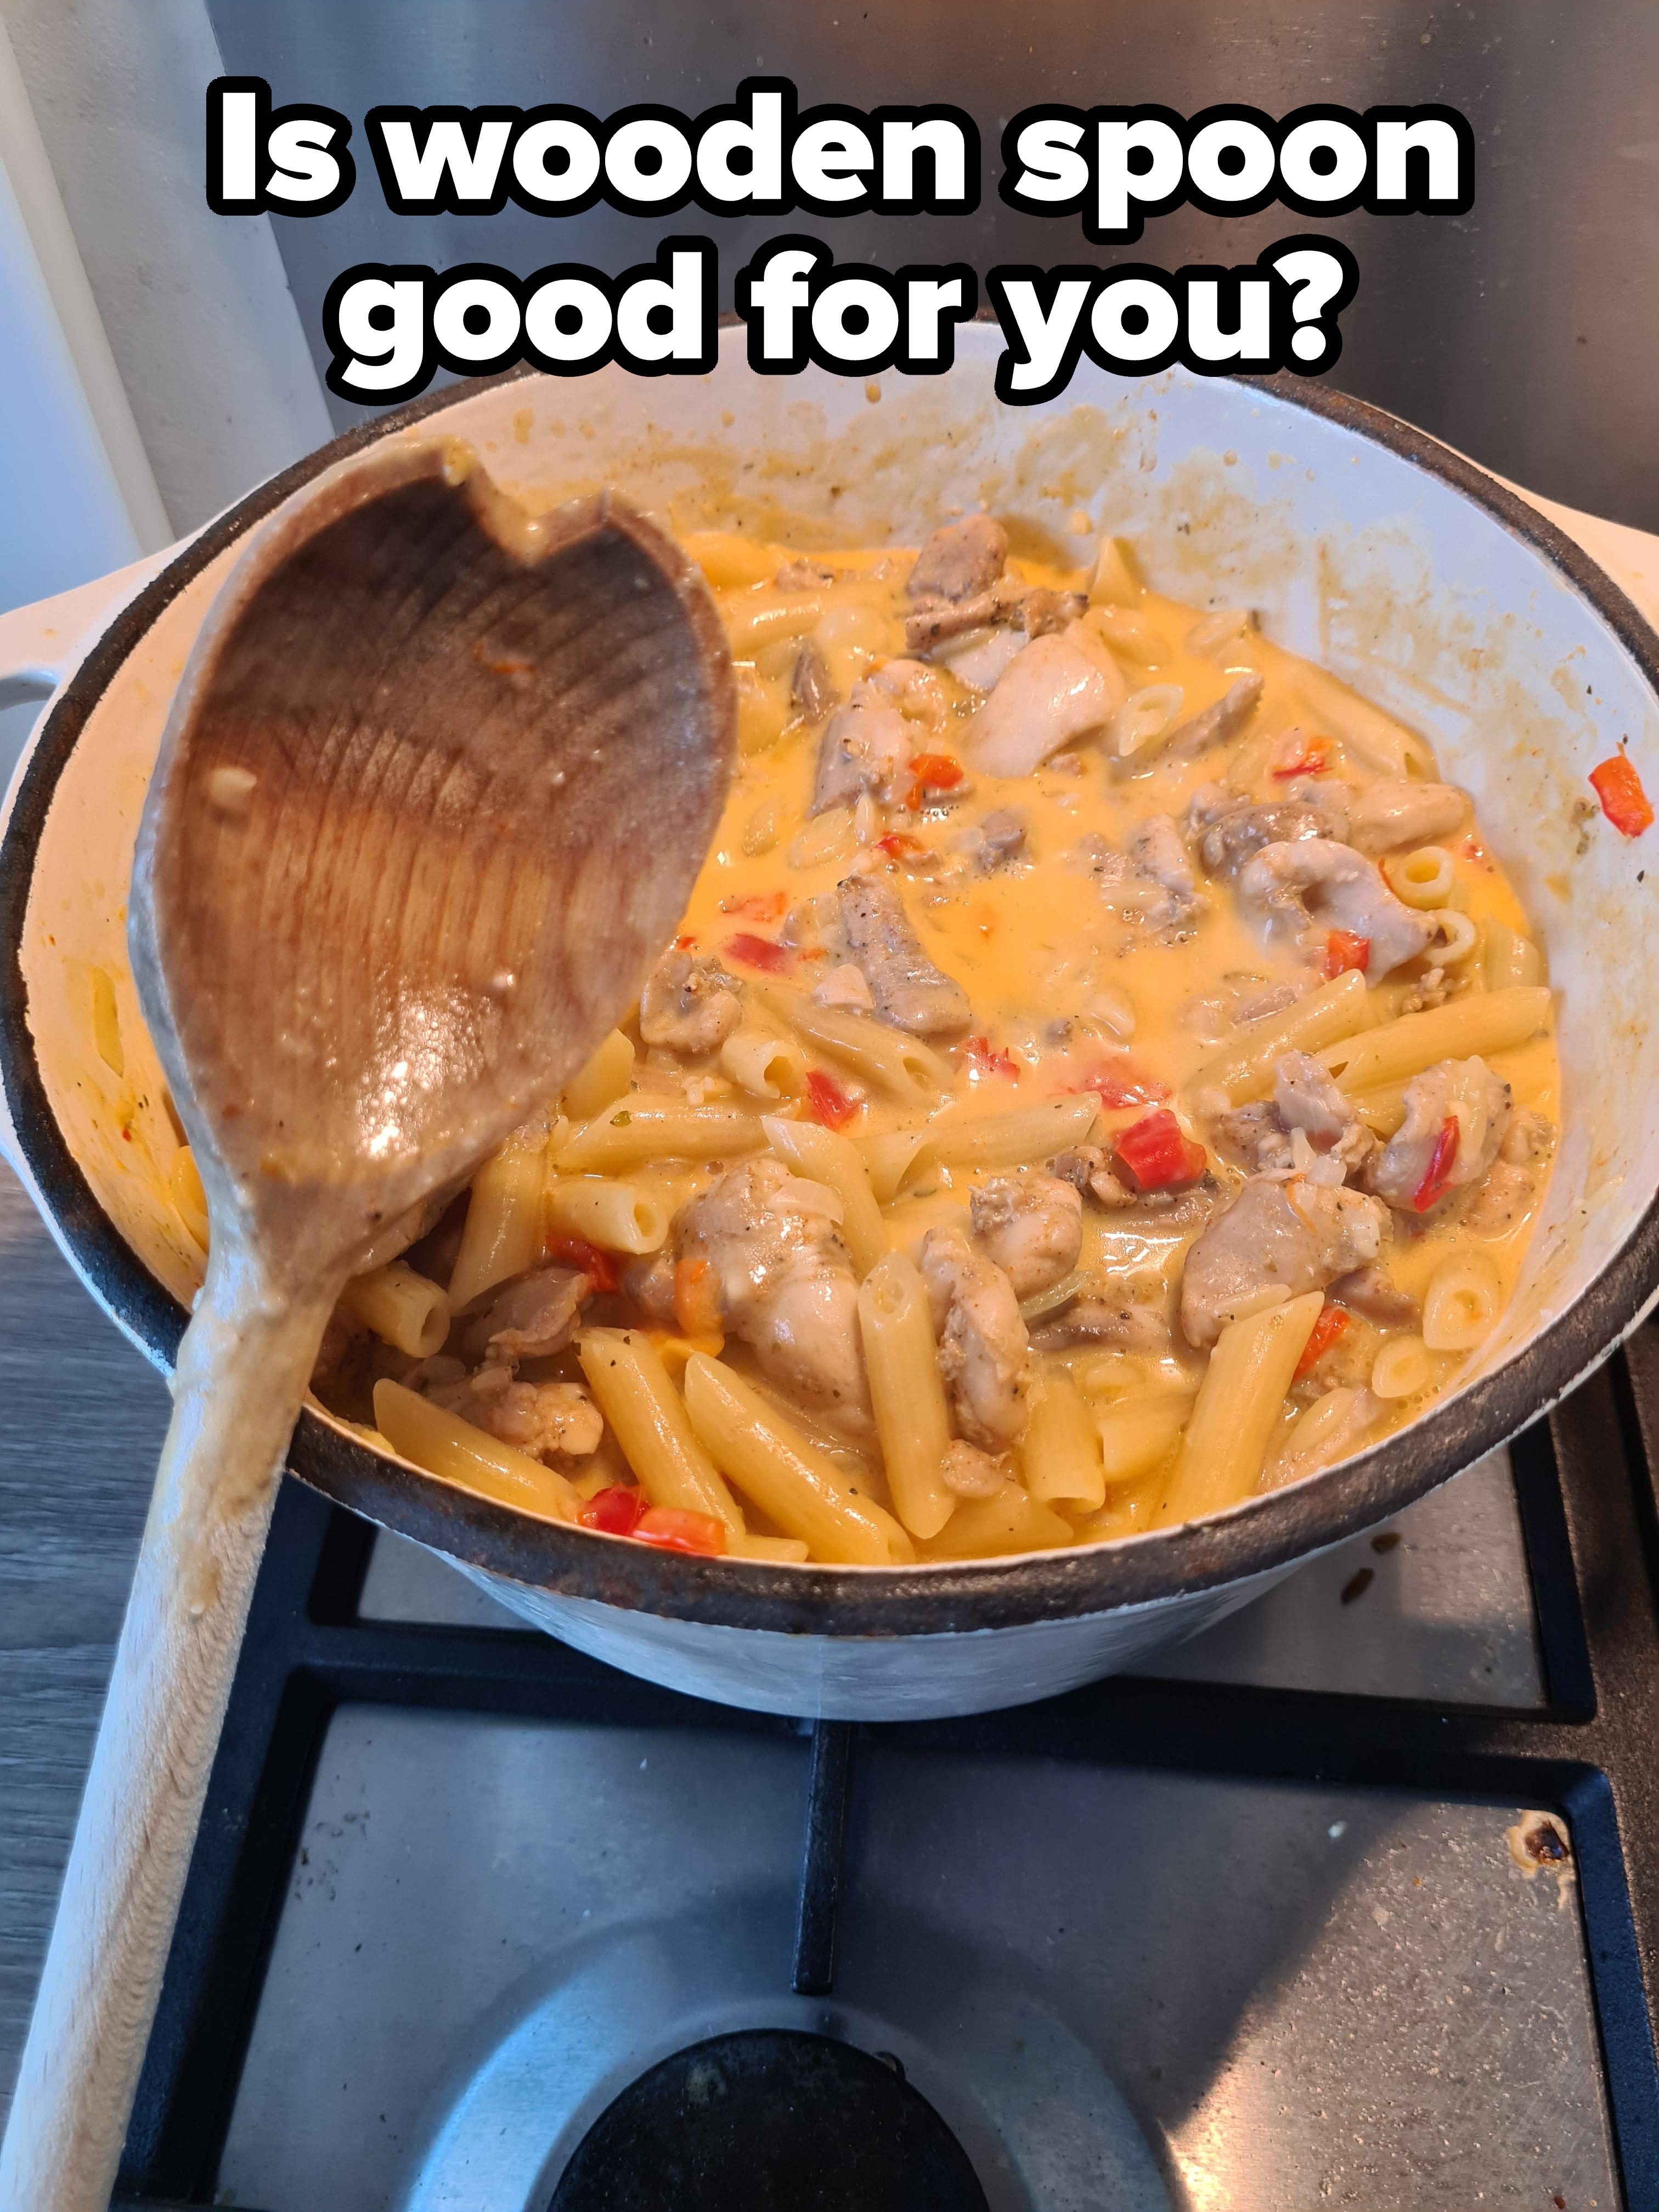 A pot of pasta with creamy sauce, chicken pieces, and red bell peppers on a stove. A wooden spoon rests inside the pot